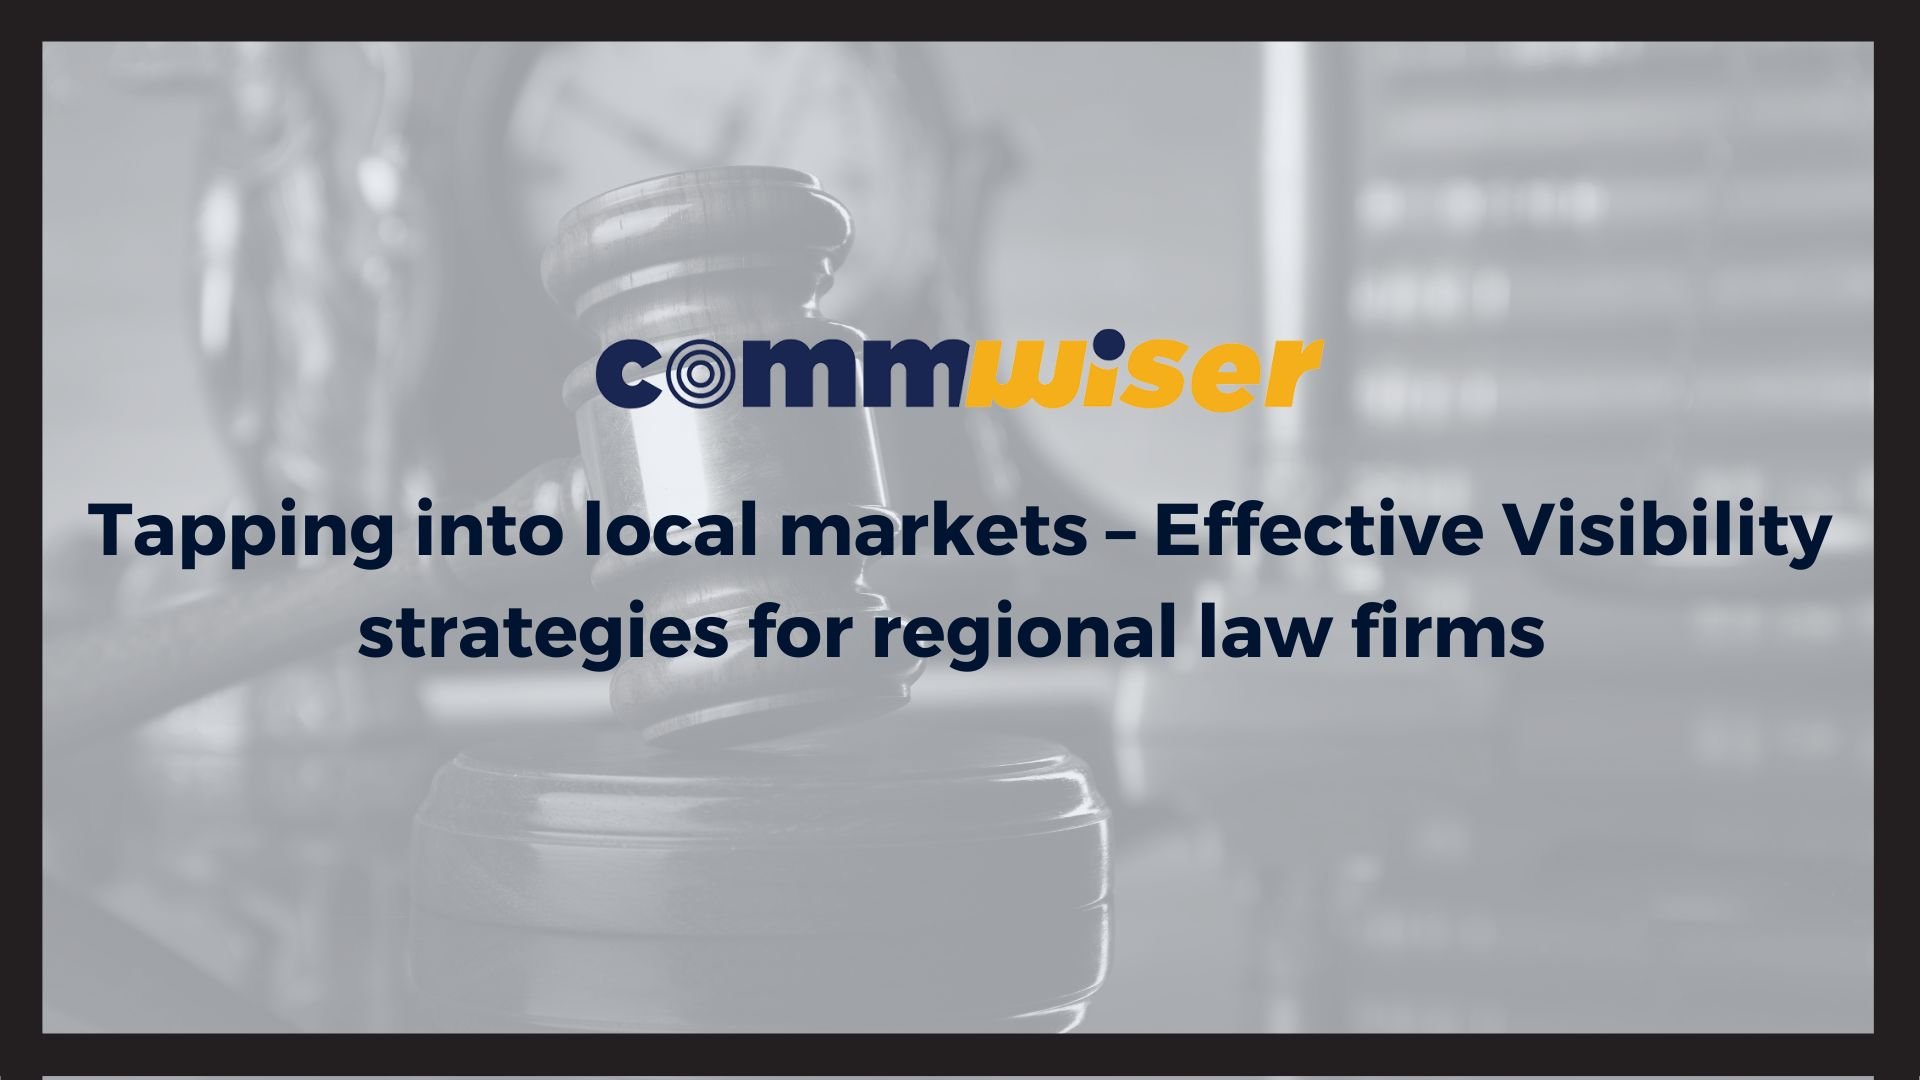 Tapping into local markets – Effective Visibility strategies for regional law firms